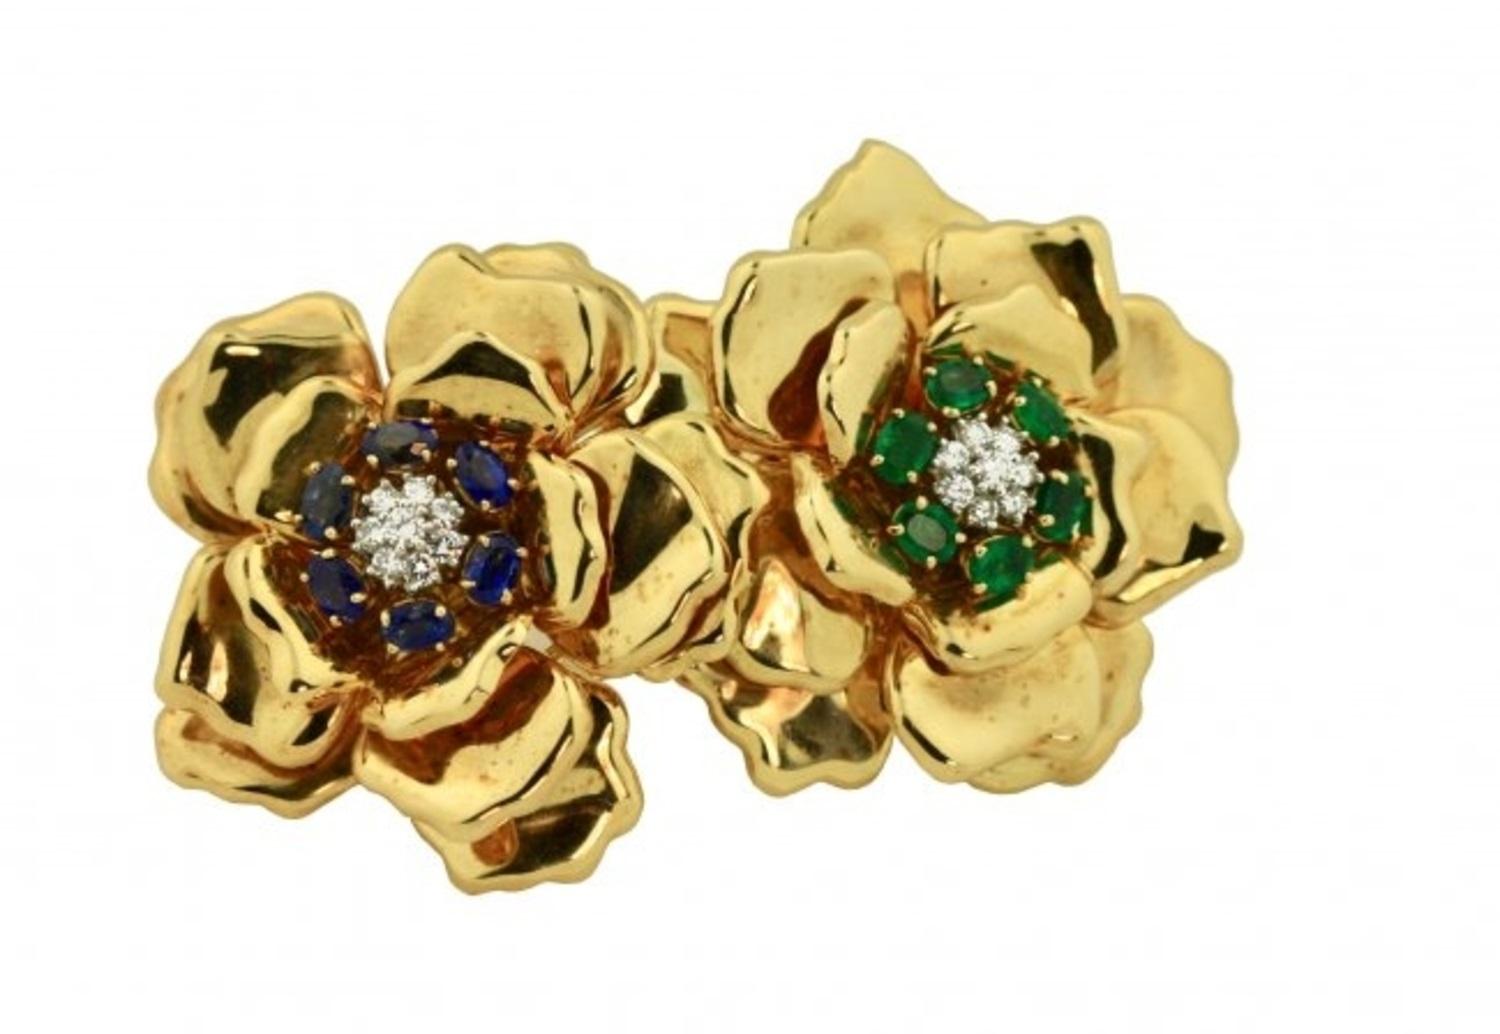 
18 Karat Gold Sapphire and Diamond Brooch, Emis
The flowerheads with centers set with Sapphires and Emeralds, accented by round diamonds, signed Emis
Sapphires and Emeralds together weighing approx. 5.50 cts.
Diamonds weighing approx. .75 cts.
87.6